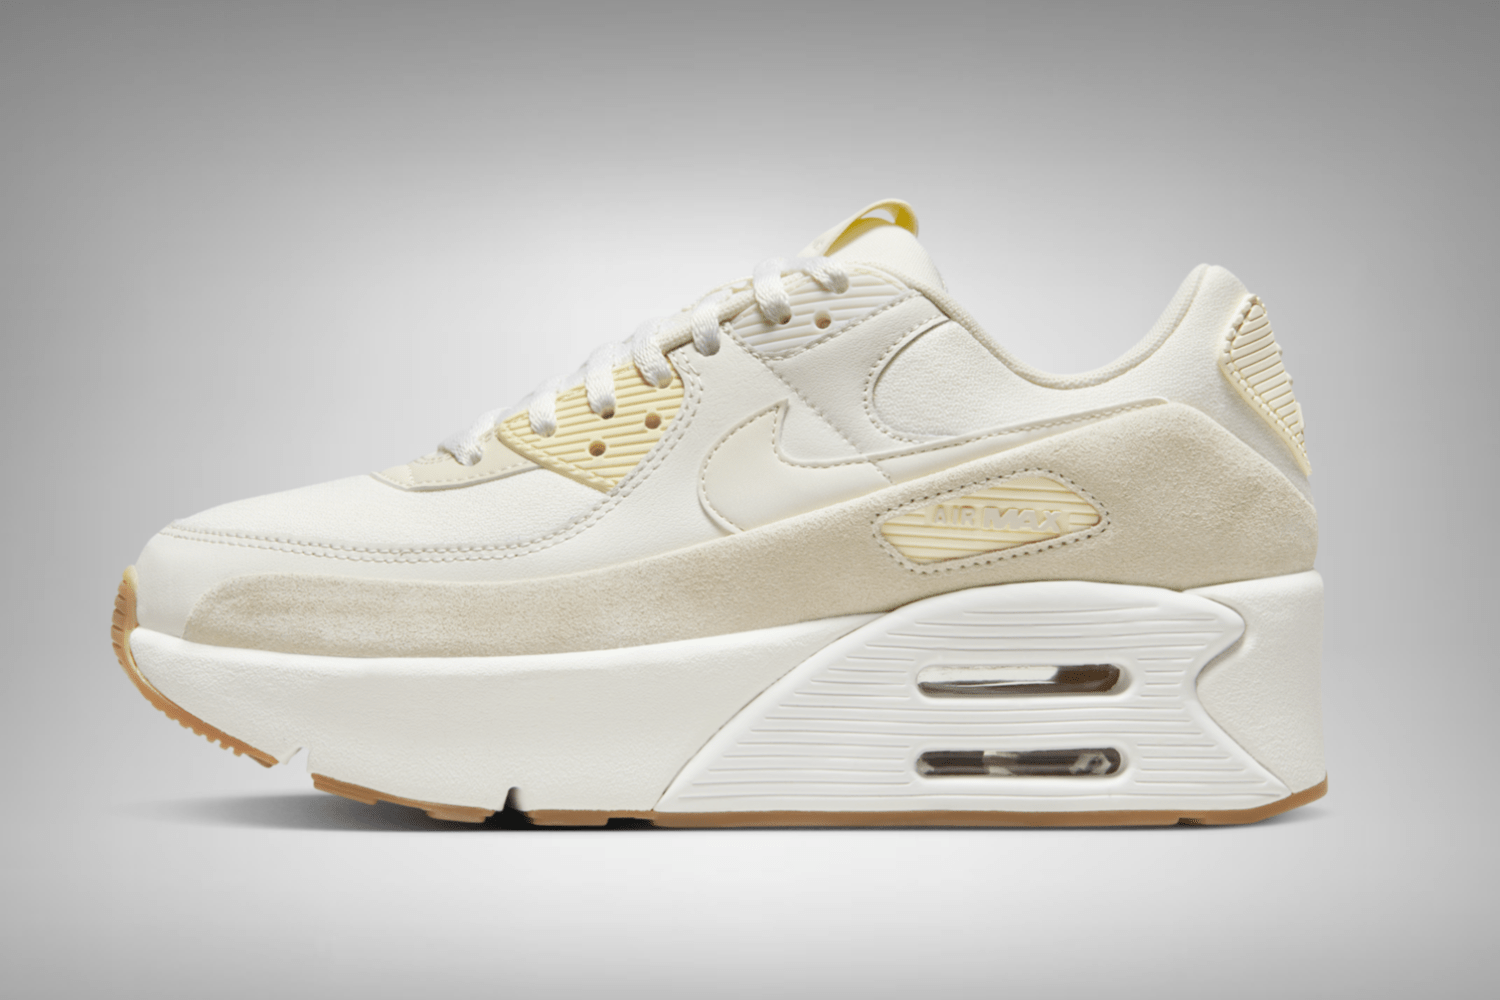 Nike puts a subtle twist on the new Air Max 90